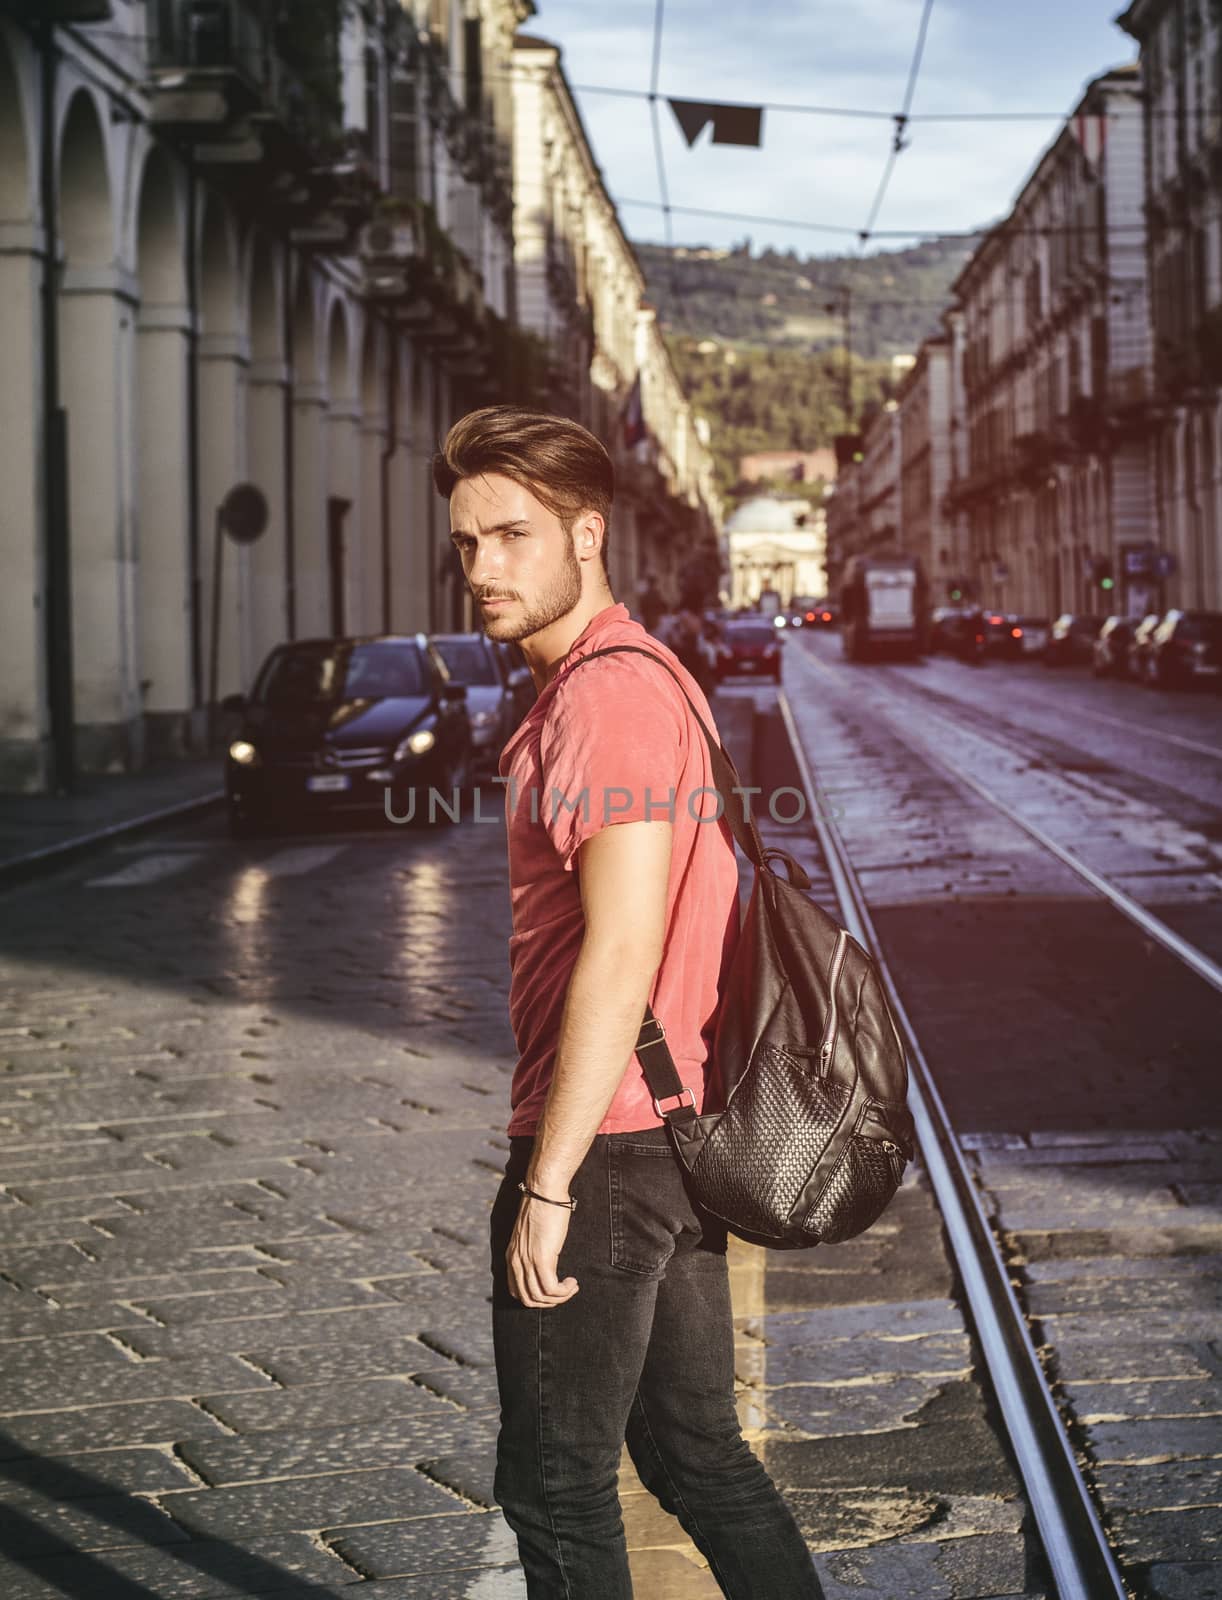 One handsome young man in urban setting in European city, Turin in Italy. Looking at camera, walking